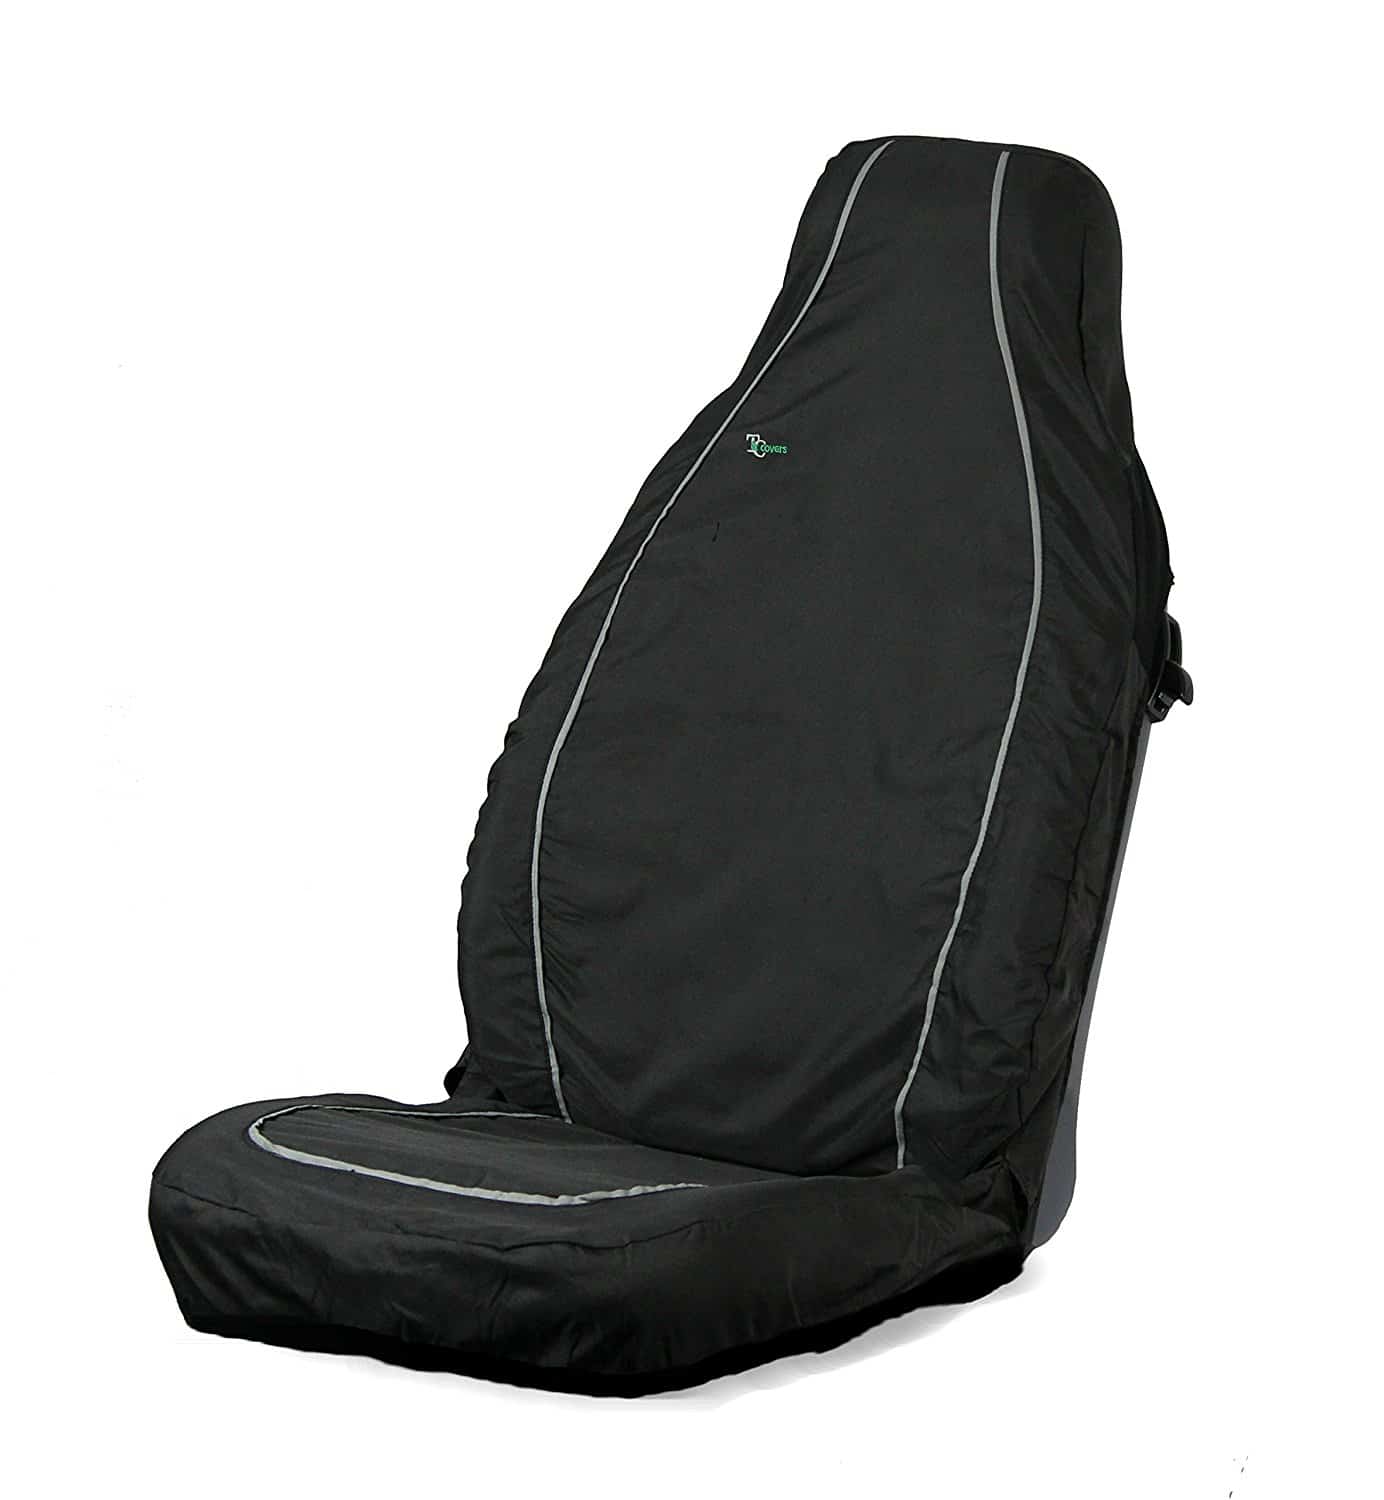 Review of Me & My Dog Car Rear Seat Protector Cover